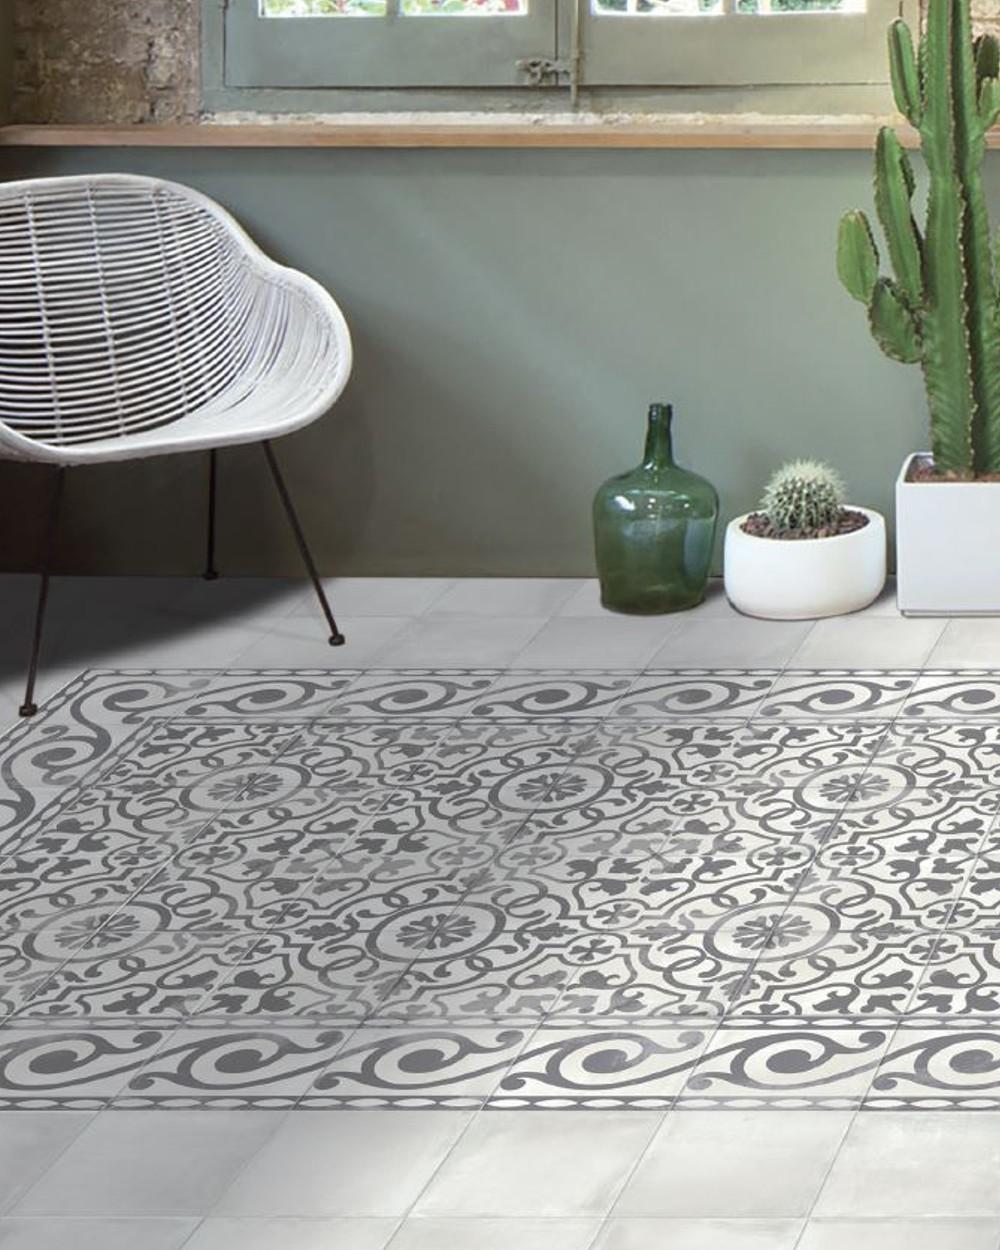 Cement tile "used look" with floral pattern black linked